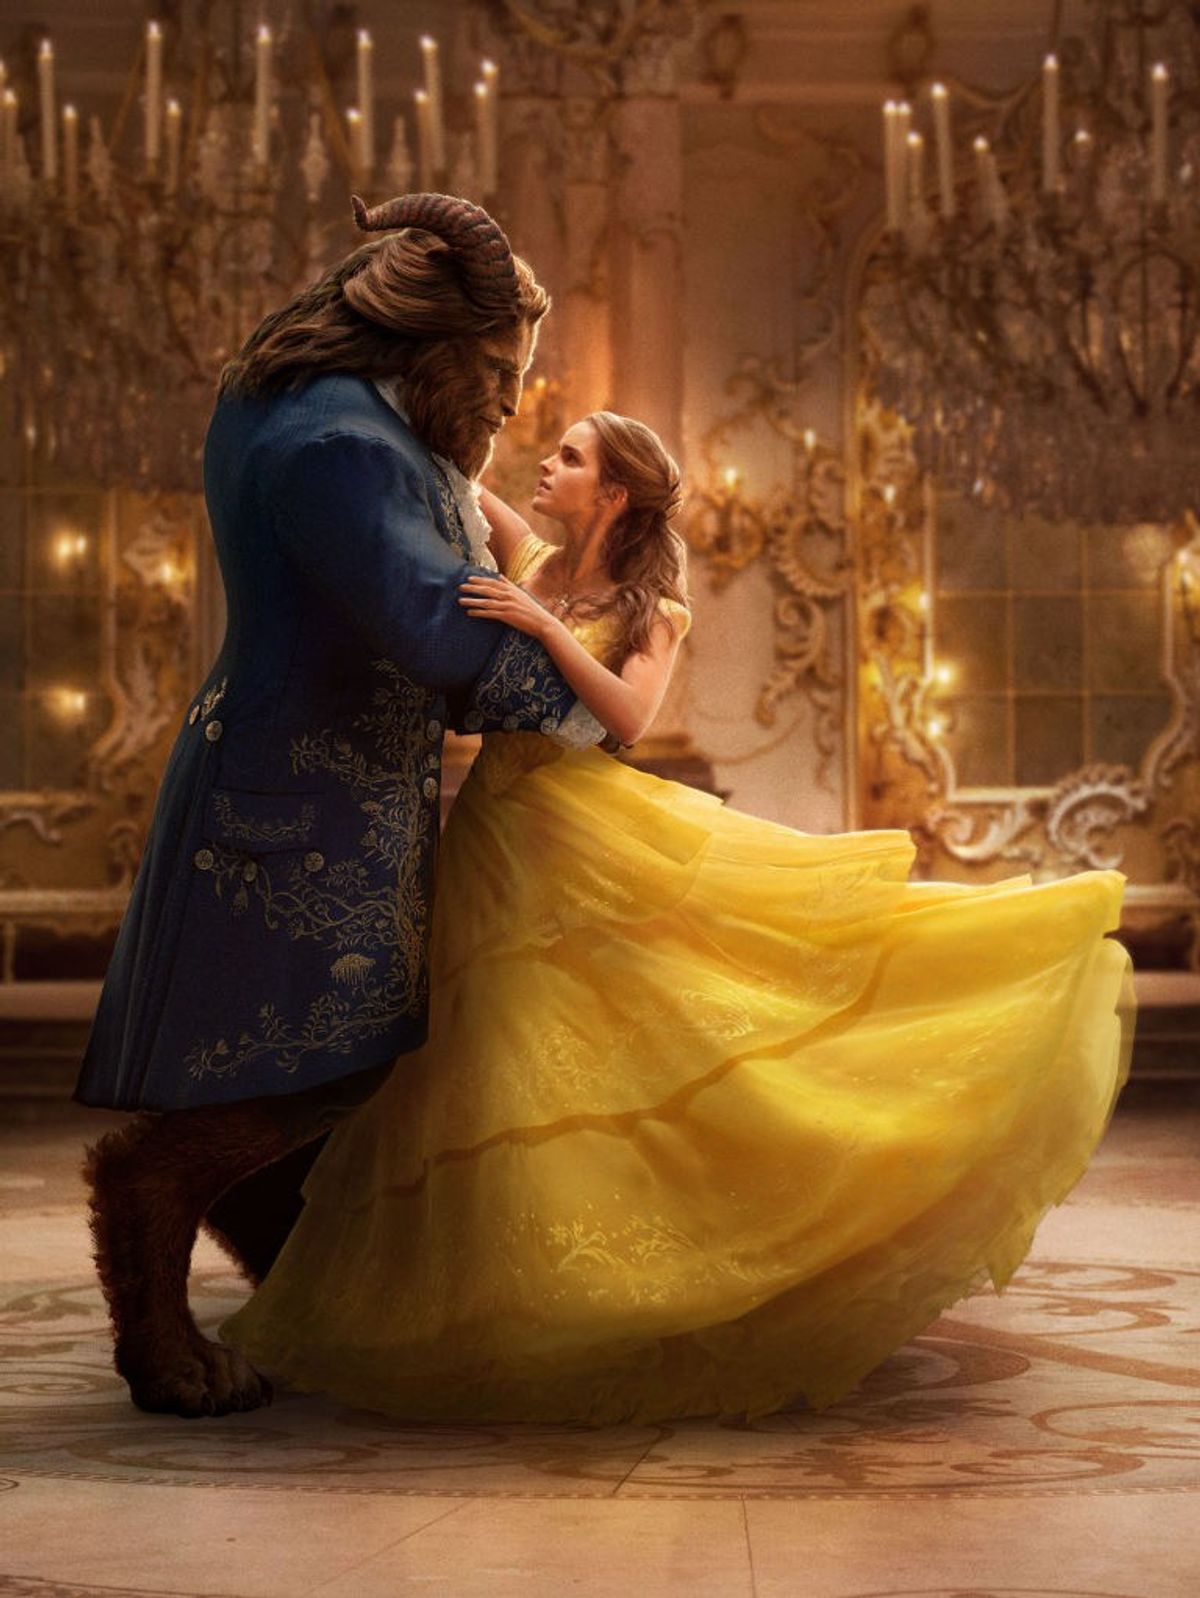 To The Christian Who Will Watch Disney's New Beauty And The Beast